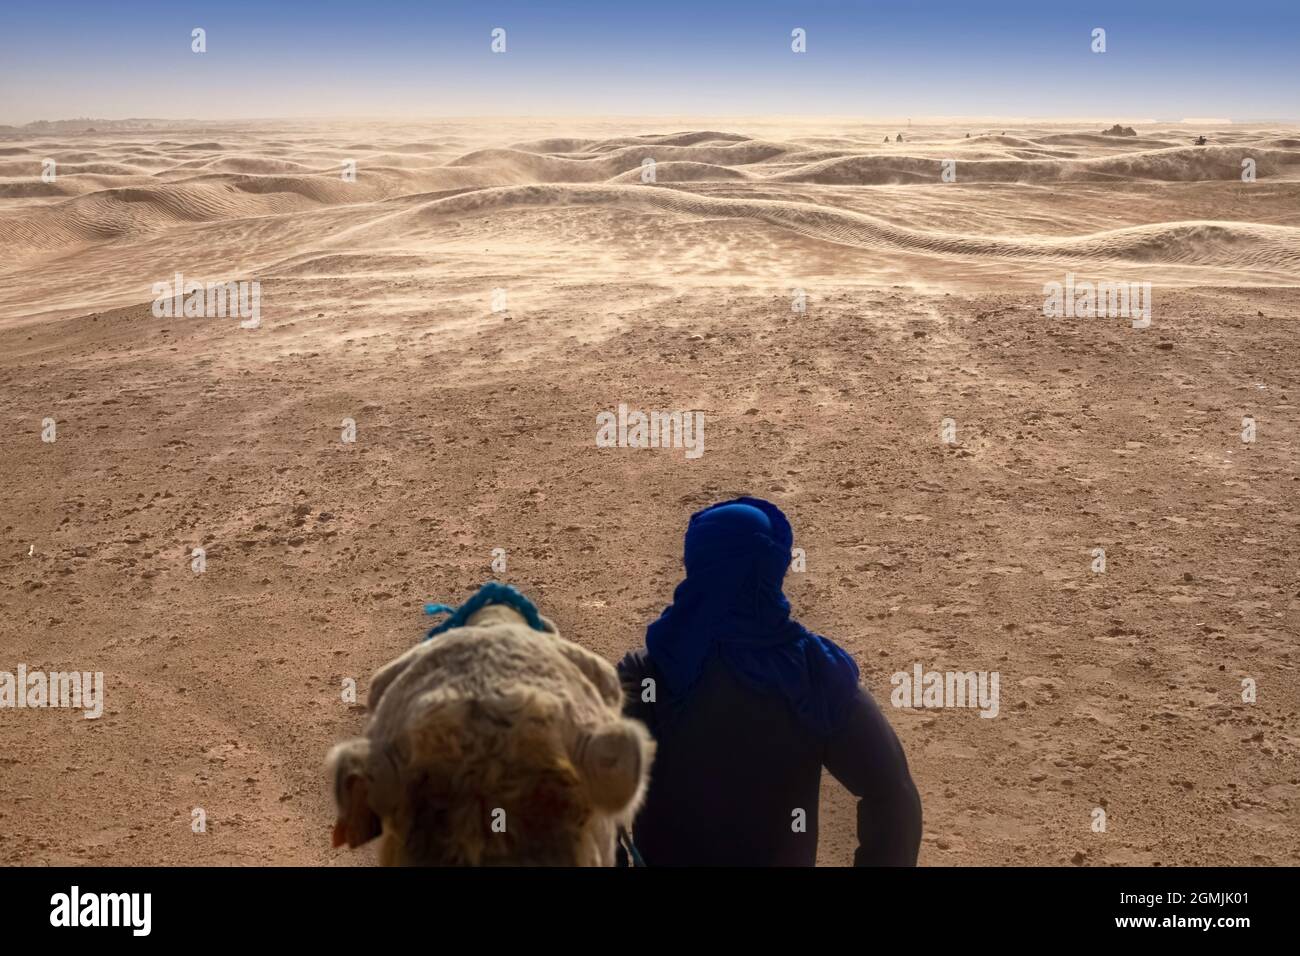 Berber stands with his back with a camel and looks into the distance in the Sahara Desert Stock Photo